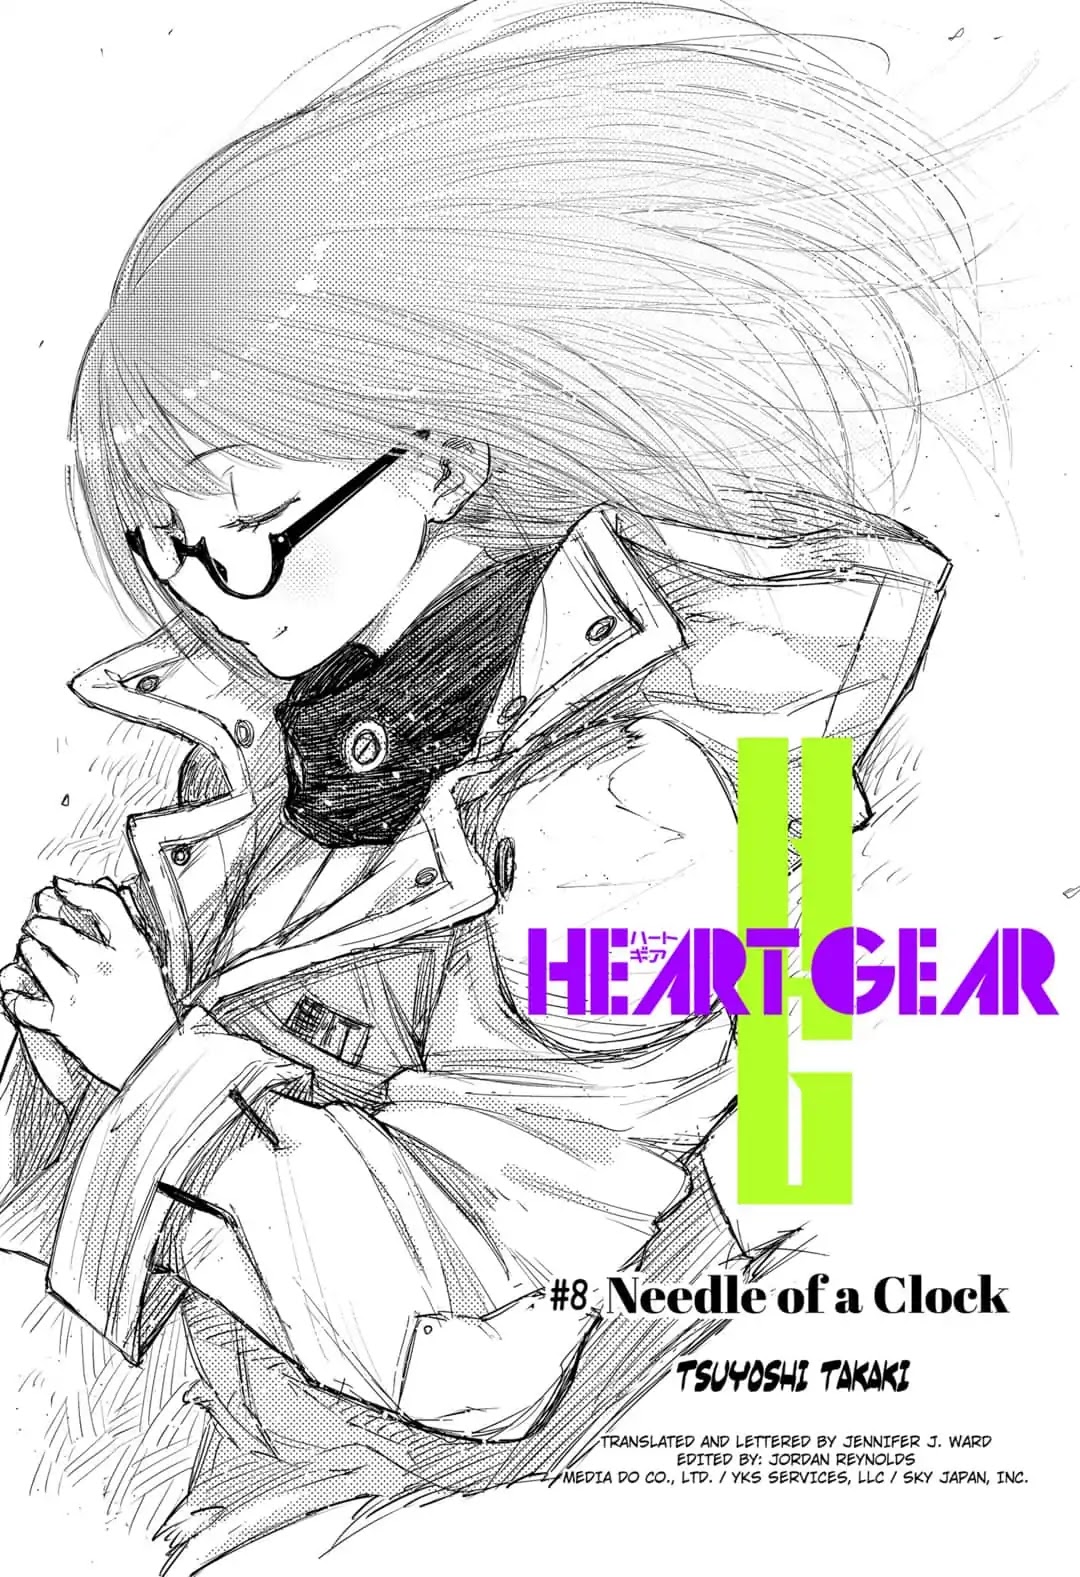 HEART GEAR Chapter 8: #8 Needle of a Clock